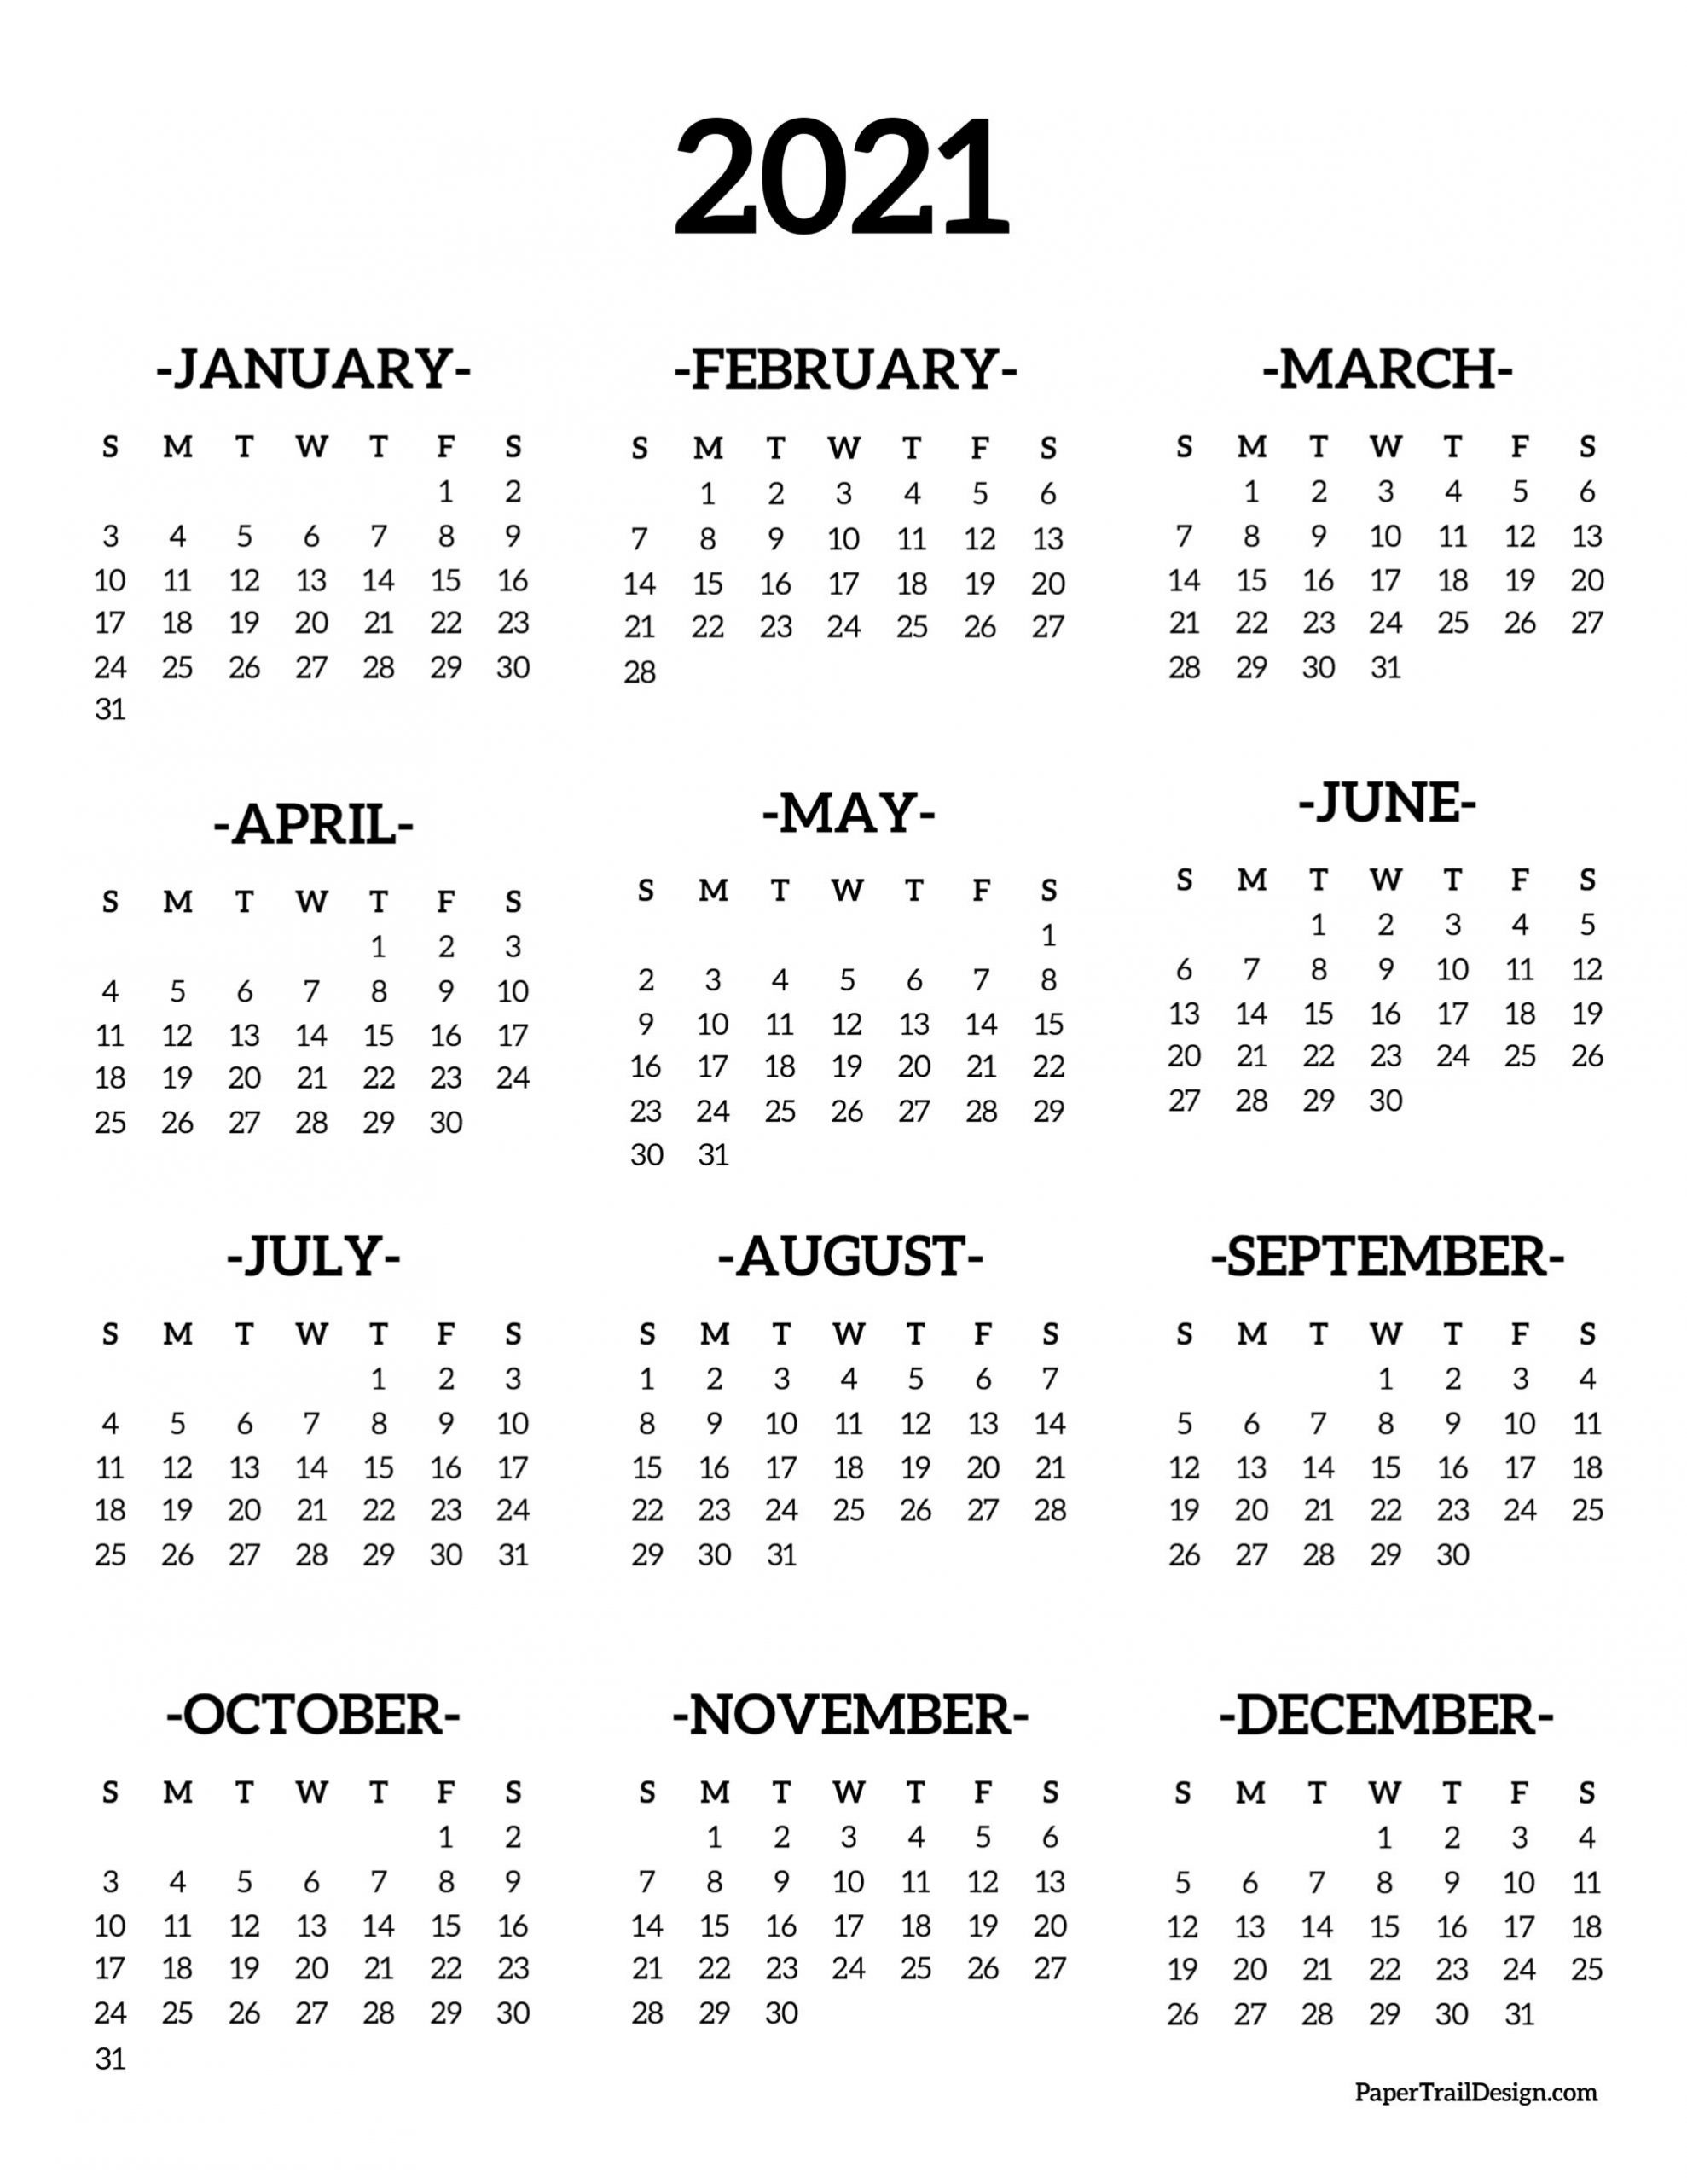 Calendar 2021 Printable One Page | Paper Trail Design-Free Printable Yearly Calendar 2021 2021